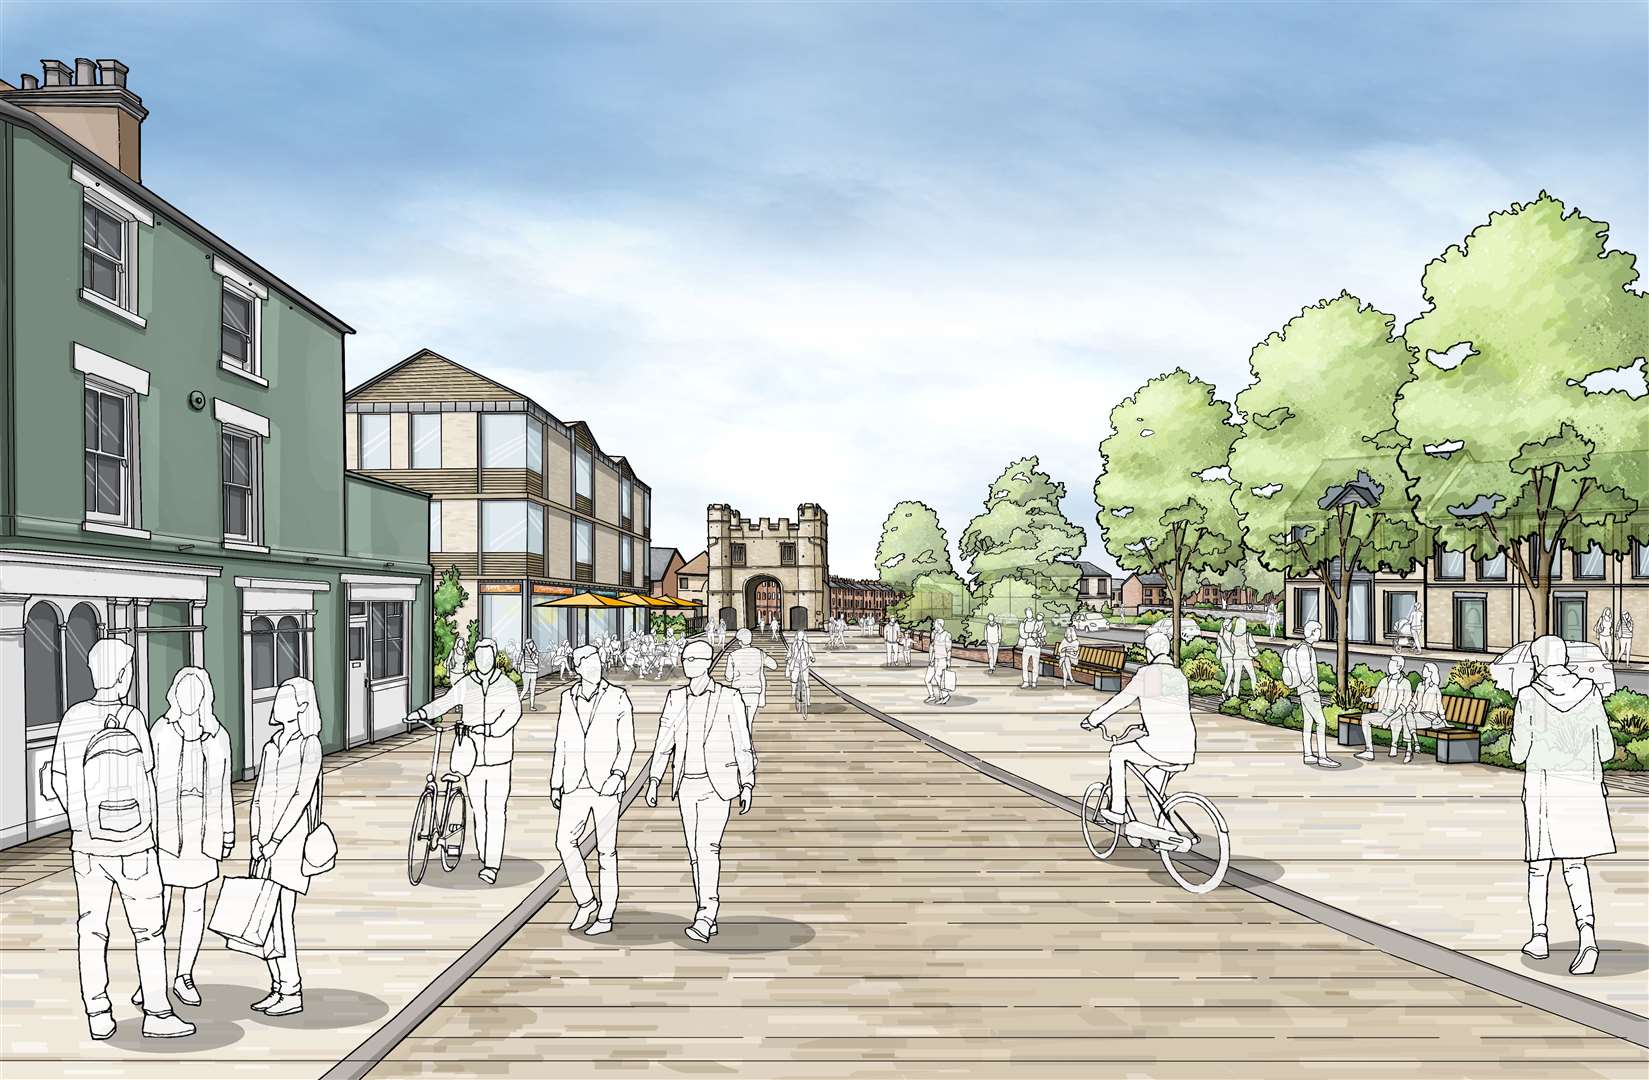 The masterplan will see the space around the 600-year-old fortification pedestrianised